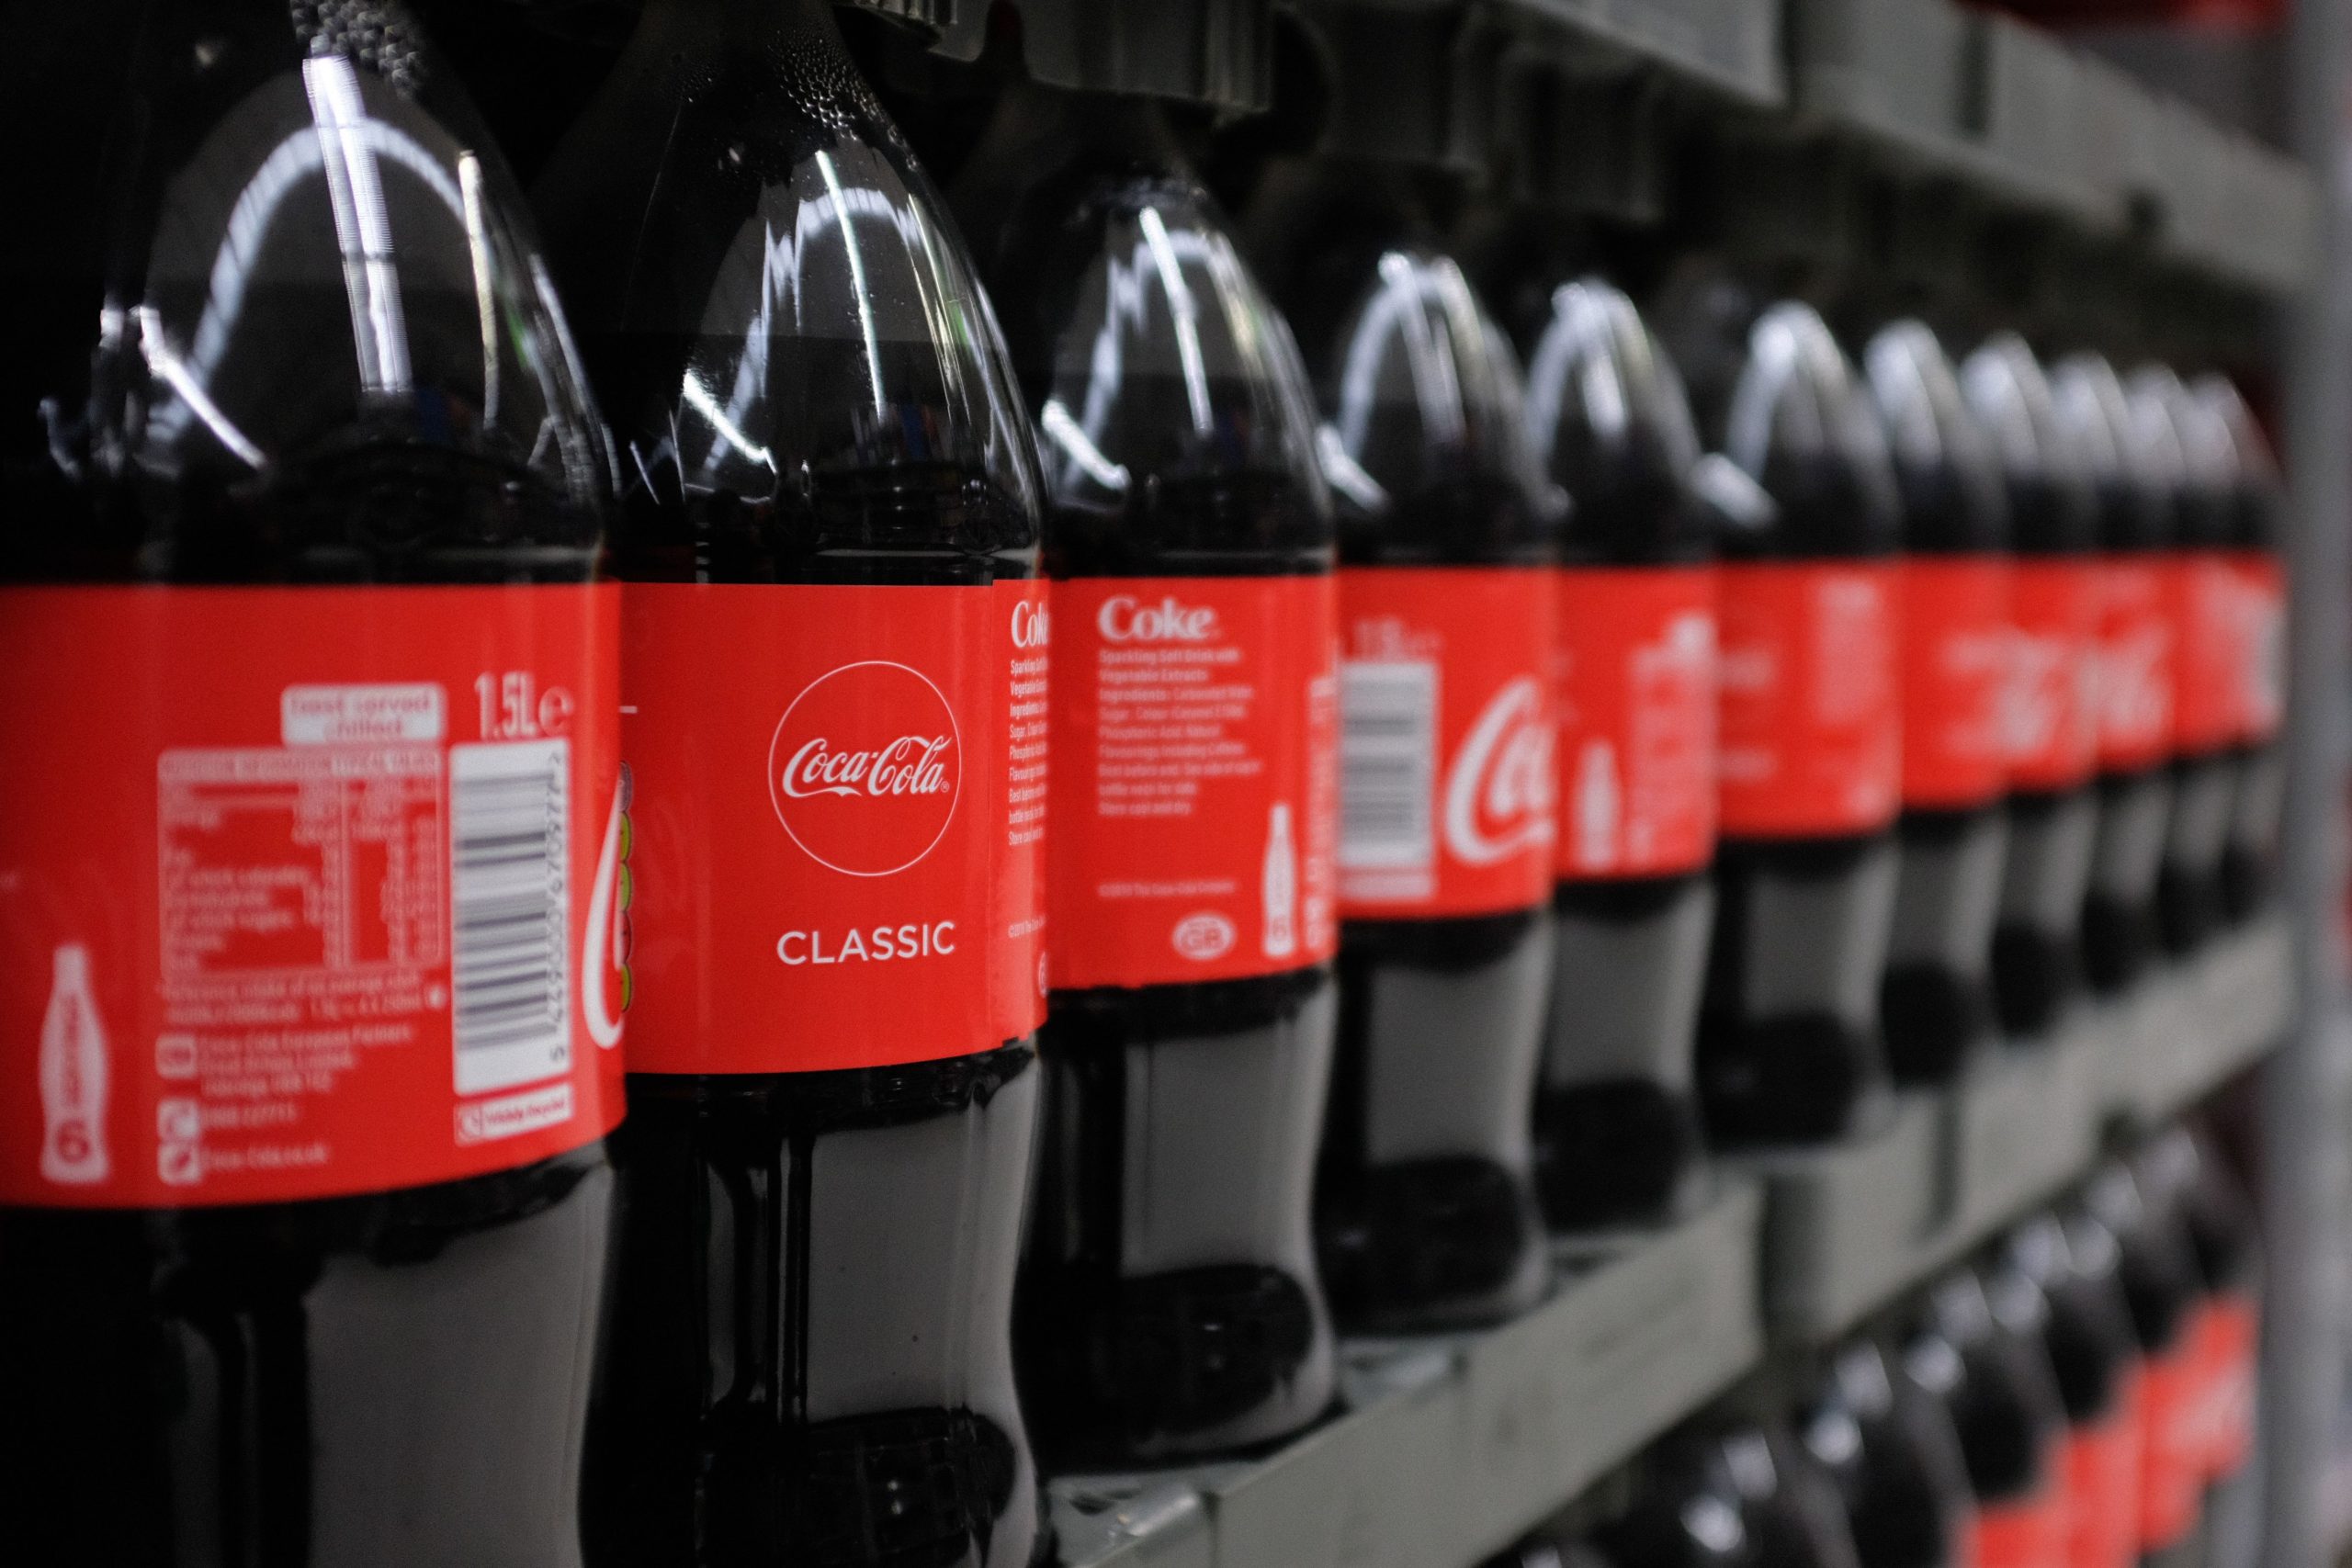 Bottles of Coca-Cola are pictured at a branch of Asda in north London, on April 27, 2018. - 42 firms, responsible for 80 percent of plastic packaging sold in Britain, have signed up to a pact that aims to tackle plastic pollution over the next seven years through a series of measures. (Photo by Daniel LEAL-OLIVAS / AFP) (Photo credit should read DANIEL LEAL-OLIVAS/AFP via Getty Images)